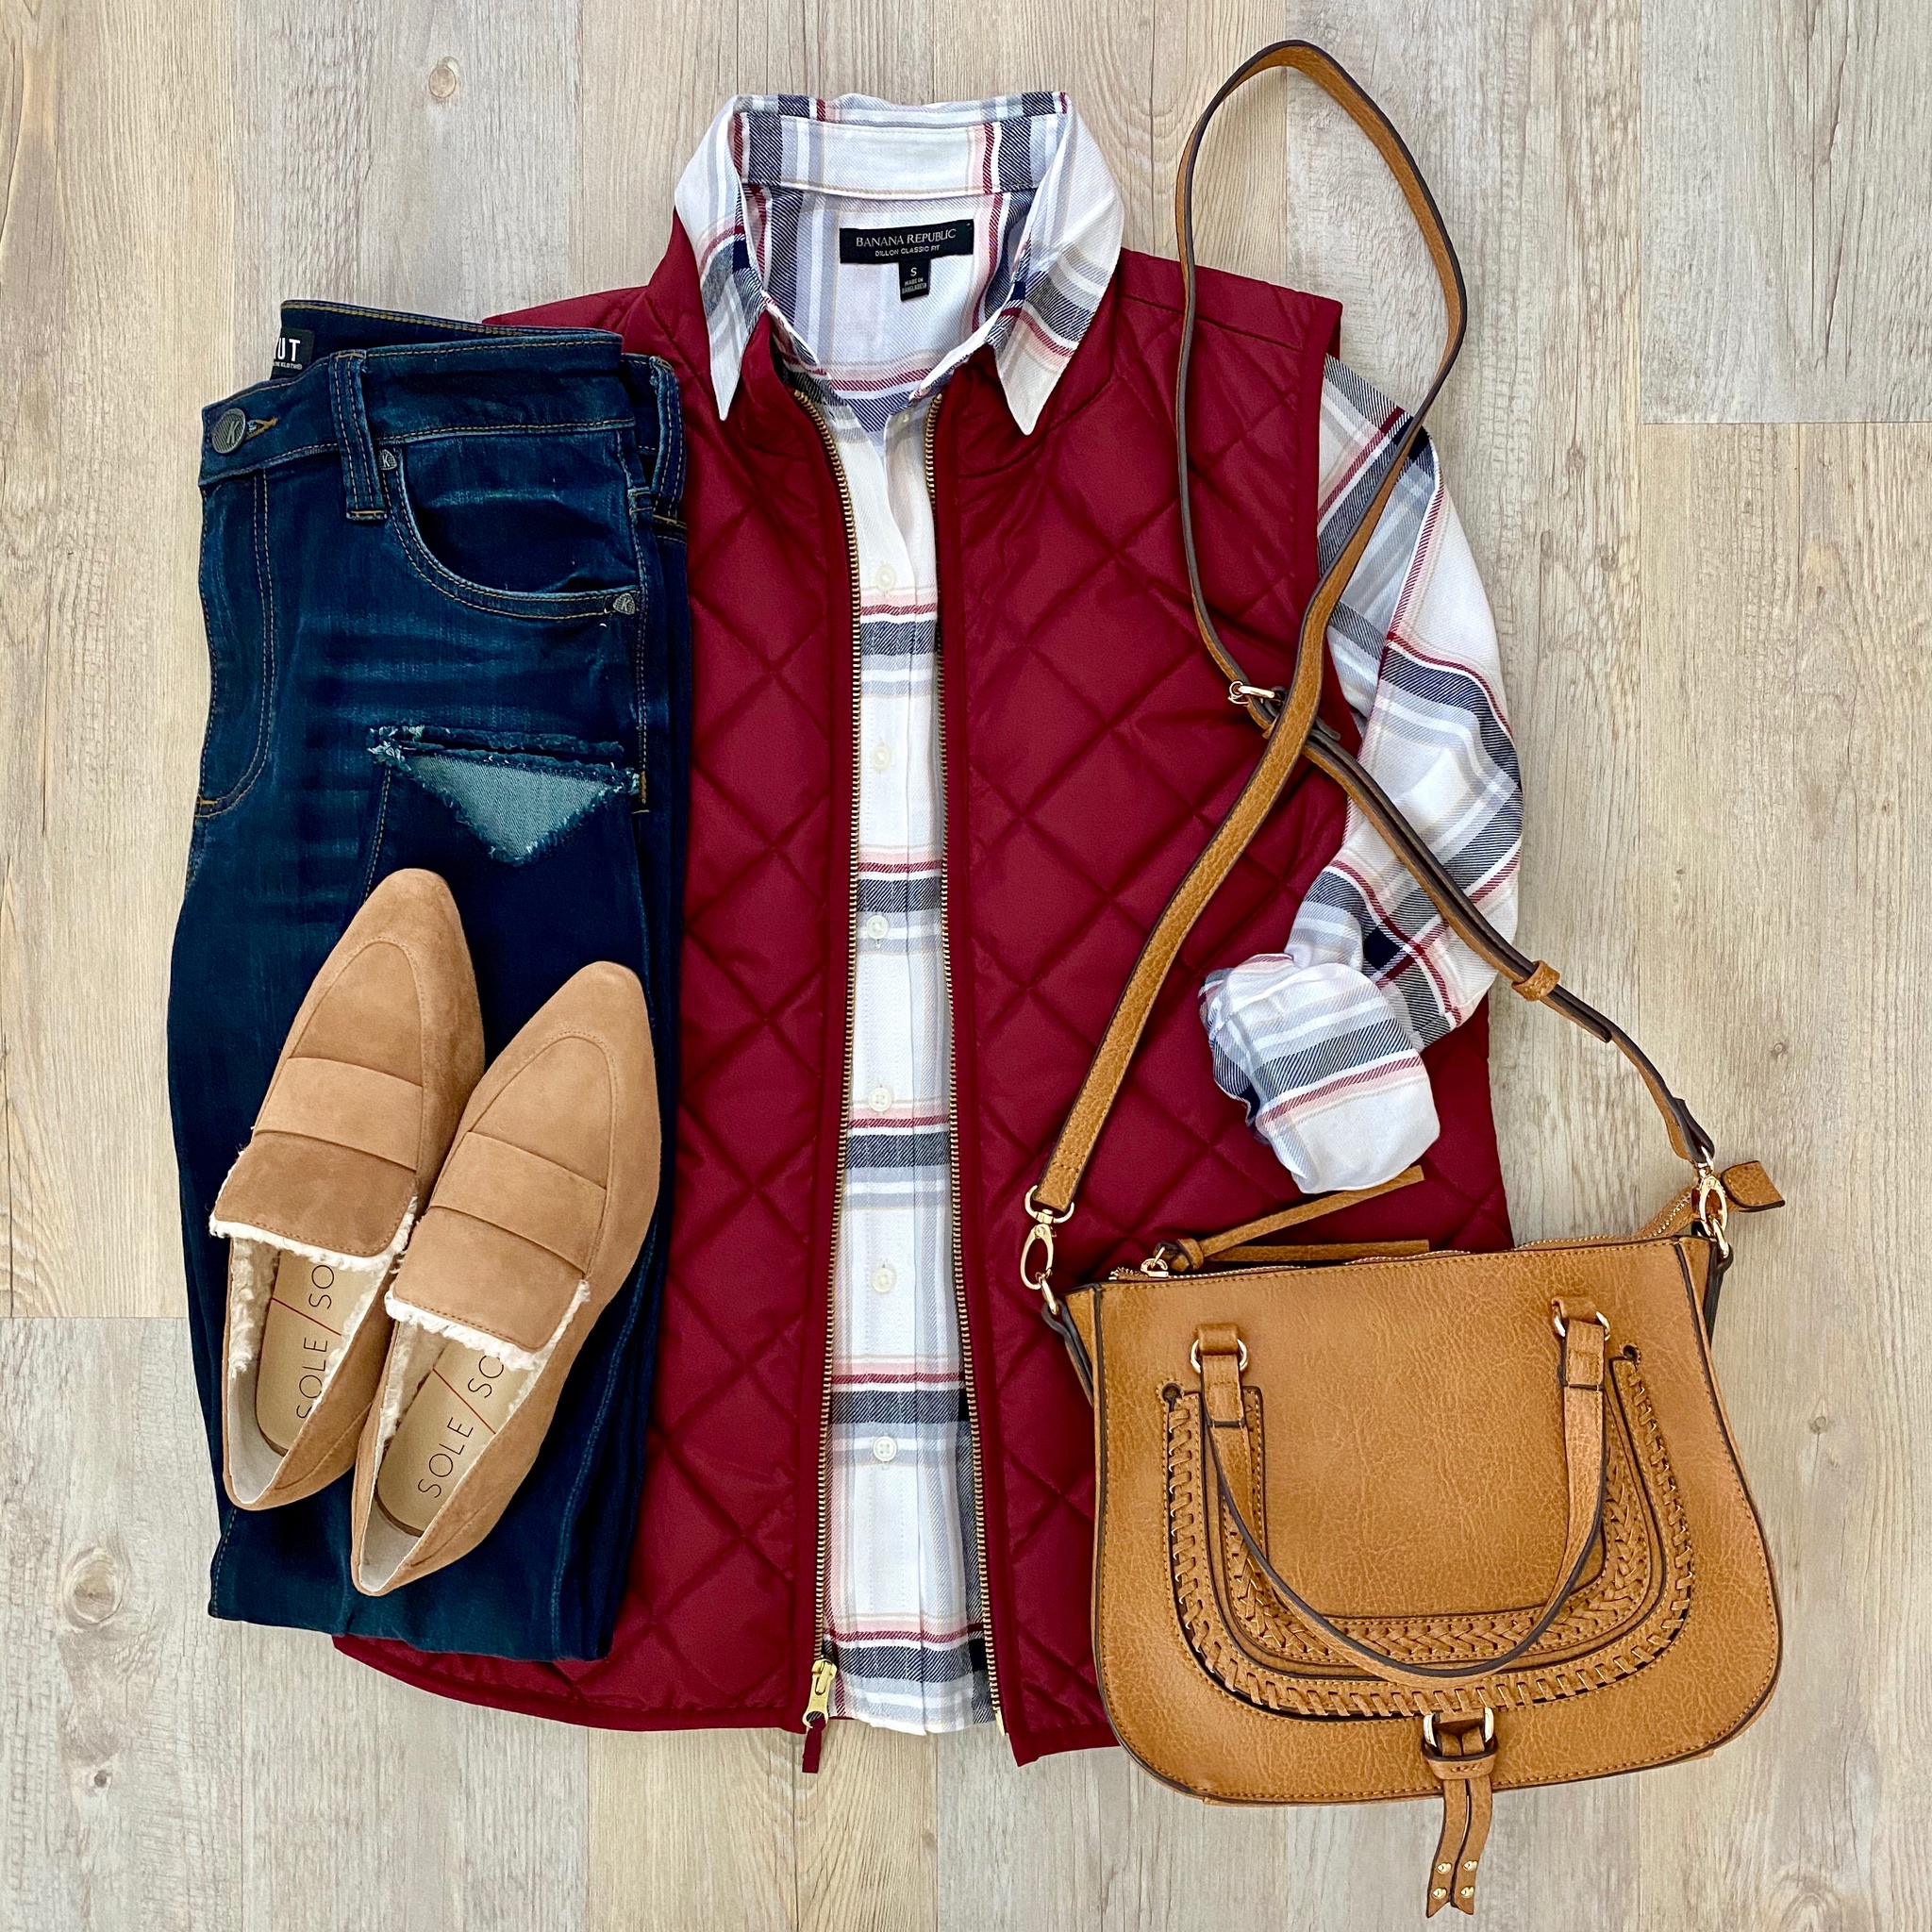 Banana Republic flannel, Old Navy puffer vest, Sole Society Bettina loafers